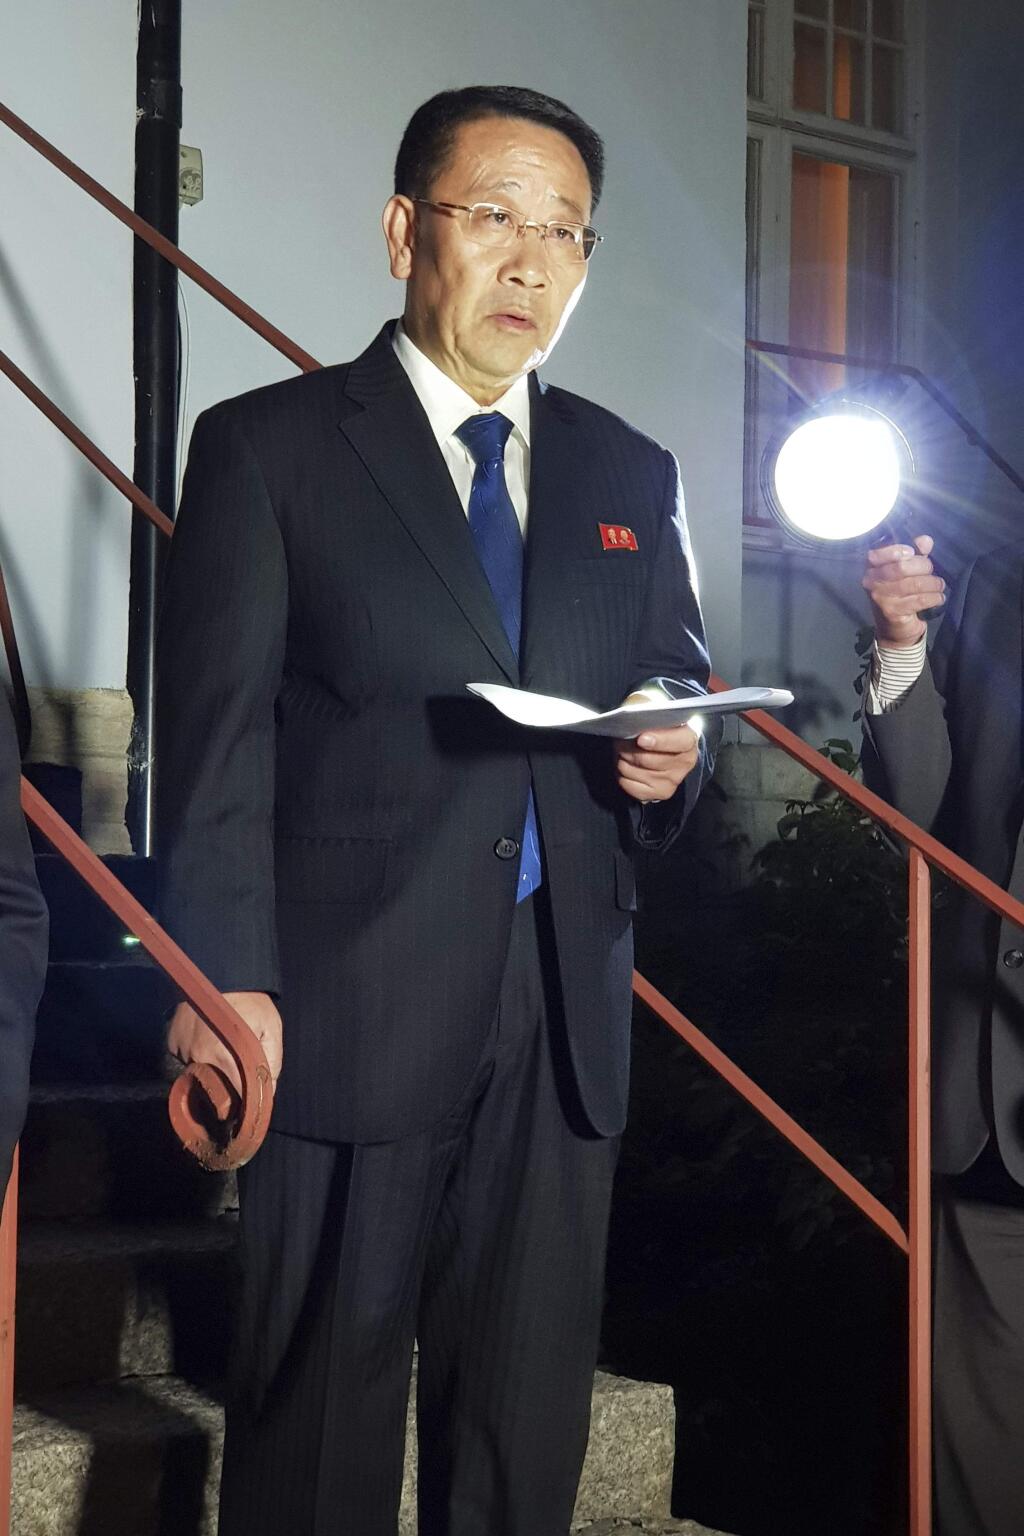 North Korean negotiator, Kim Miyong Gil speaks outside the North Korean Embassy in Stockholm, Sweden, Saturday, Oct. 5, 2019. North Korea's chief negotiator said Saturday that discussions with the U.S. on Pyongyang's nuclear program have broken down, but Washington said the two sides had 'good discussions' that it intends to build on in two weeks. (KOREA POOL/Yonhap via AP)